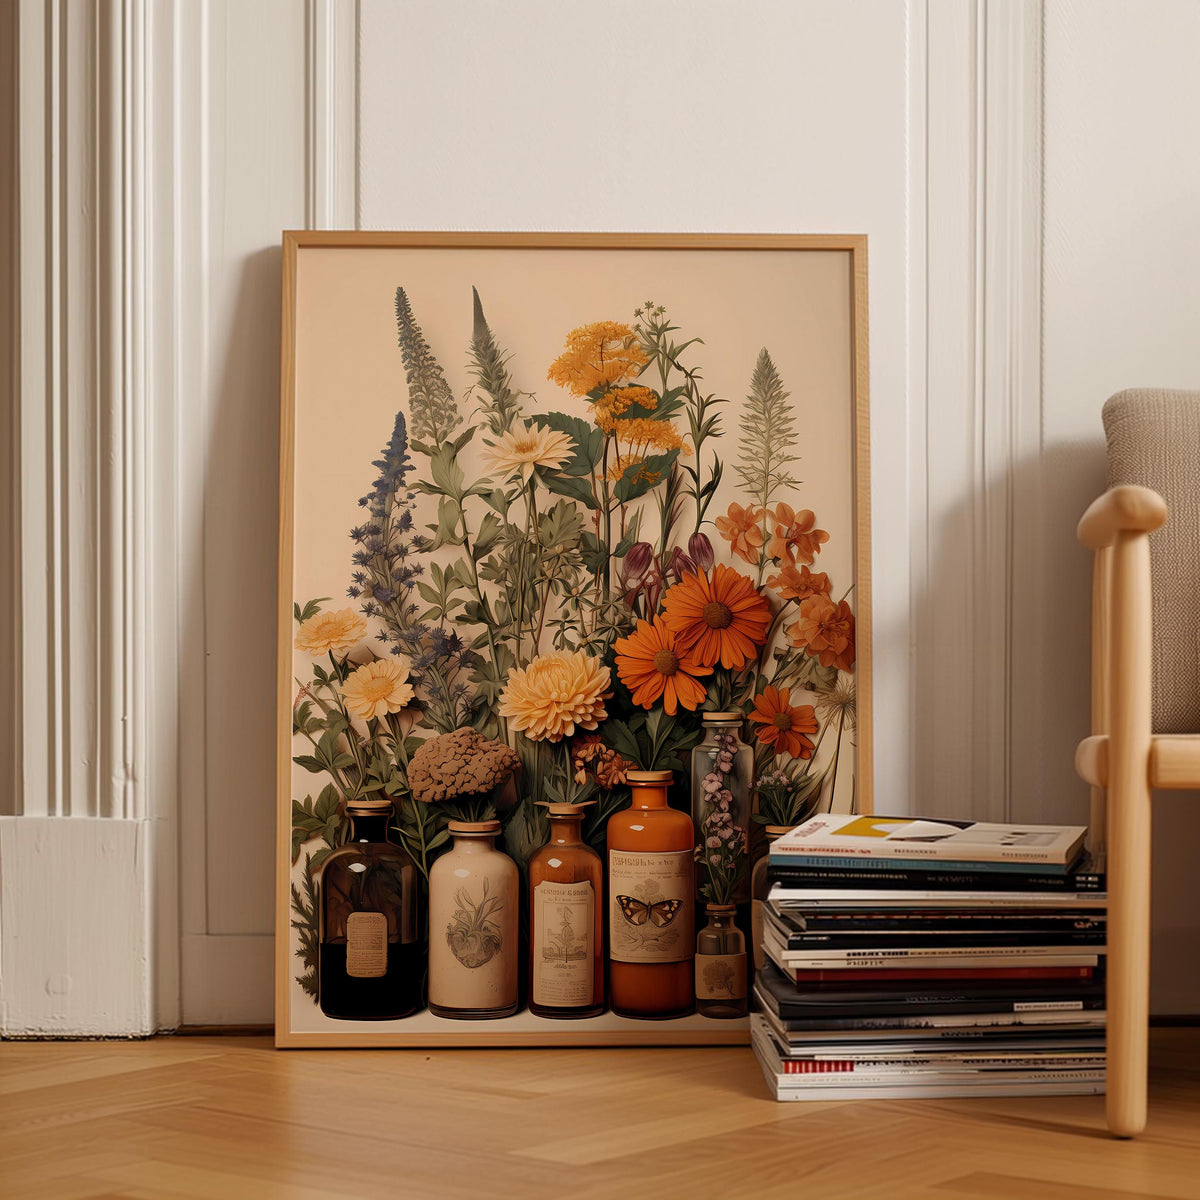 a picture of flowers and jars on a table